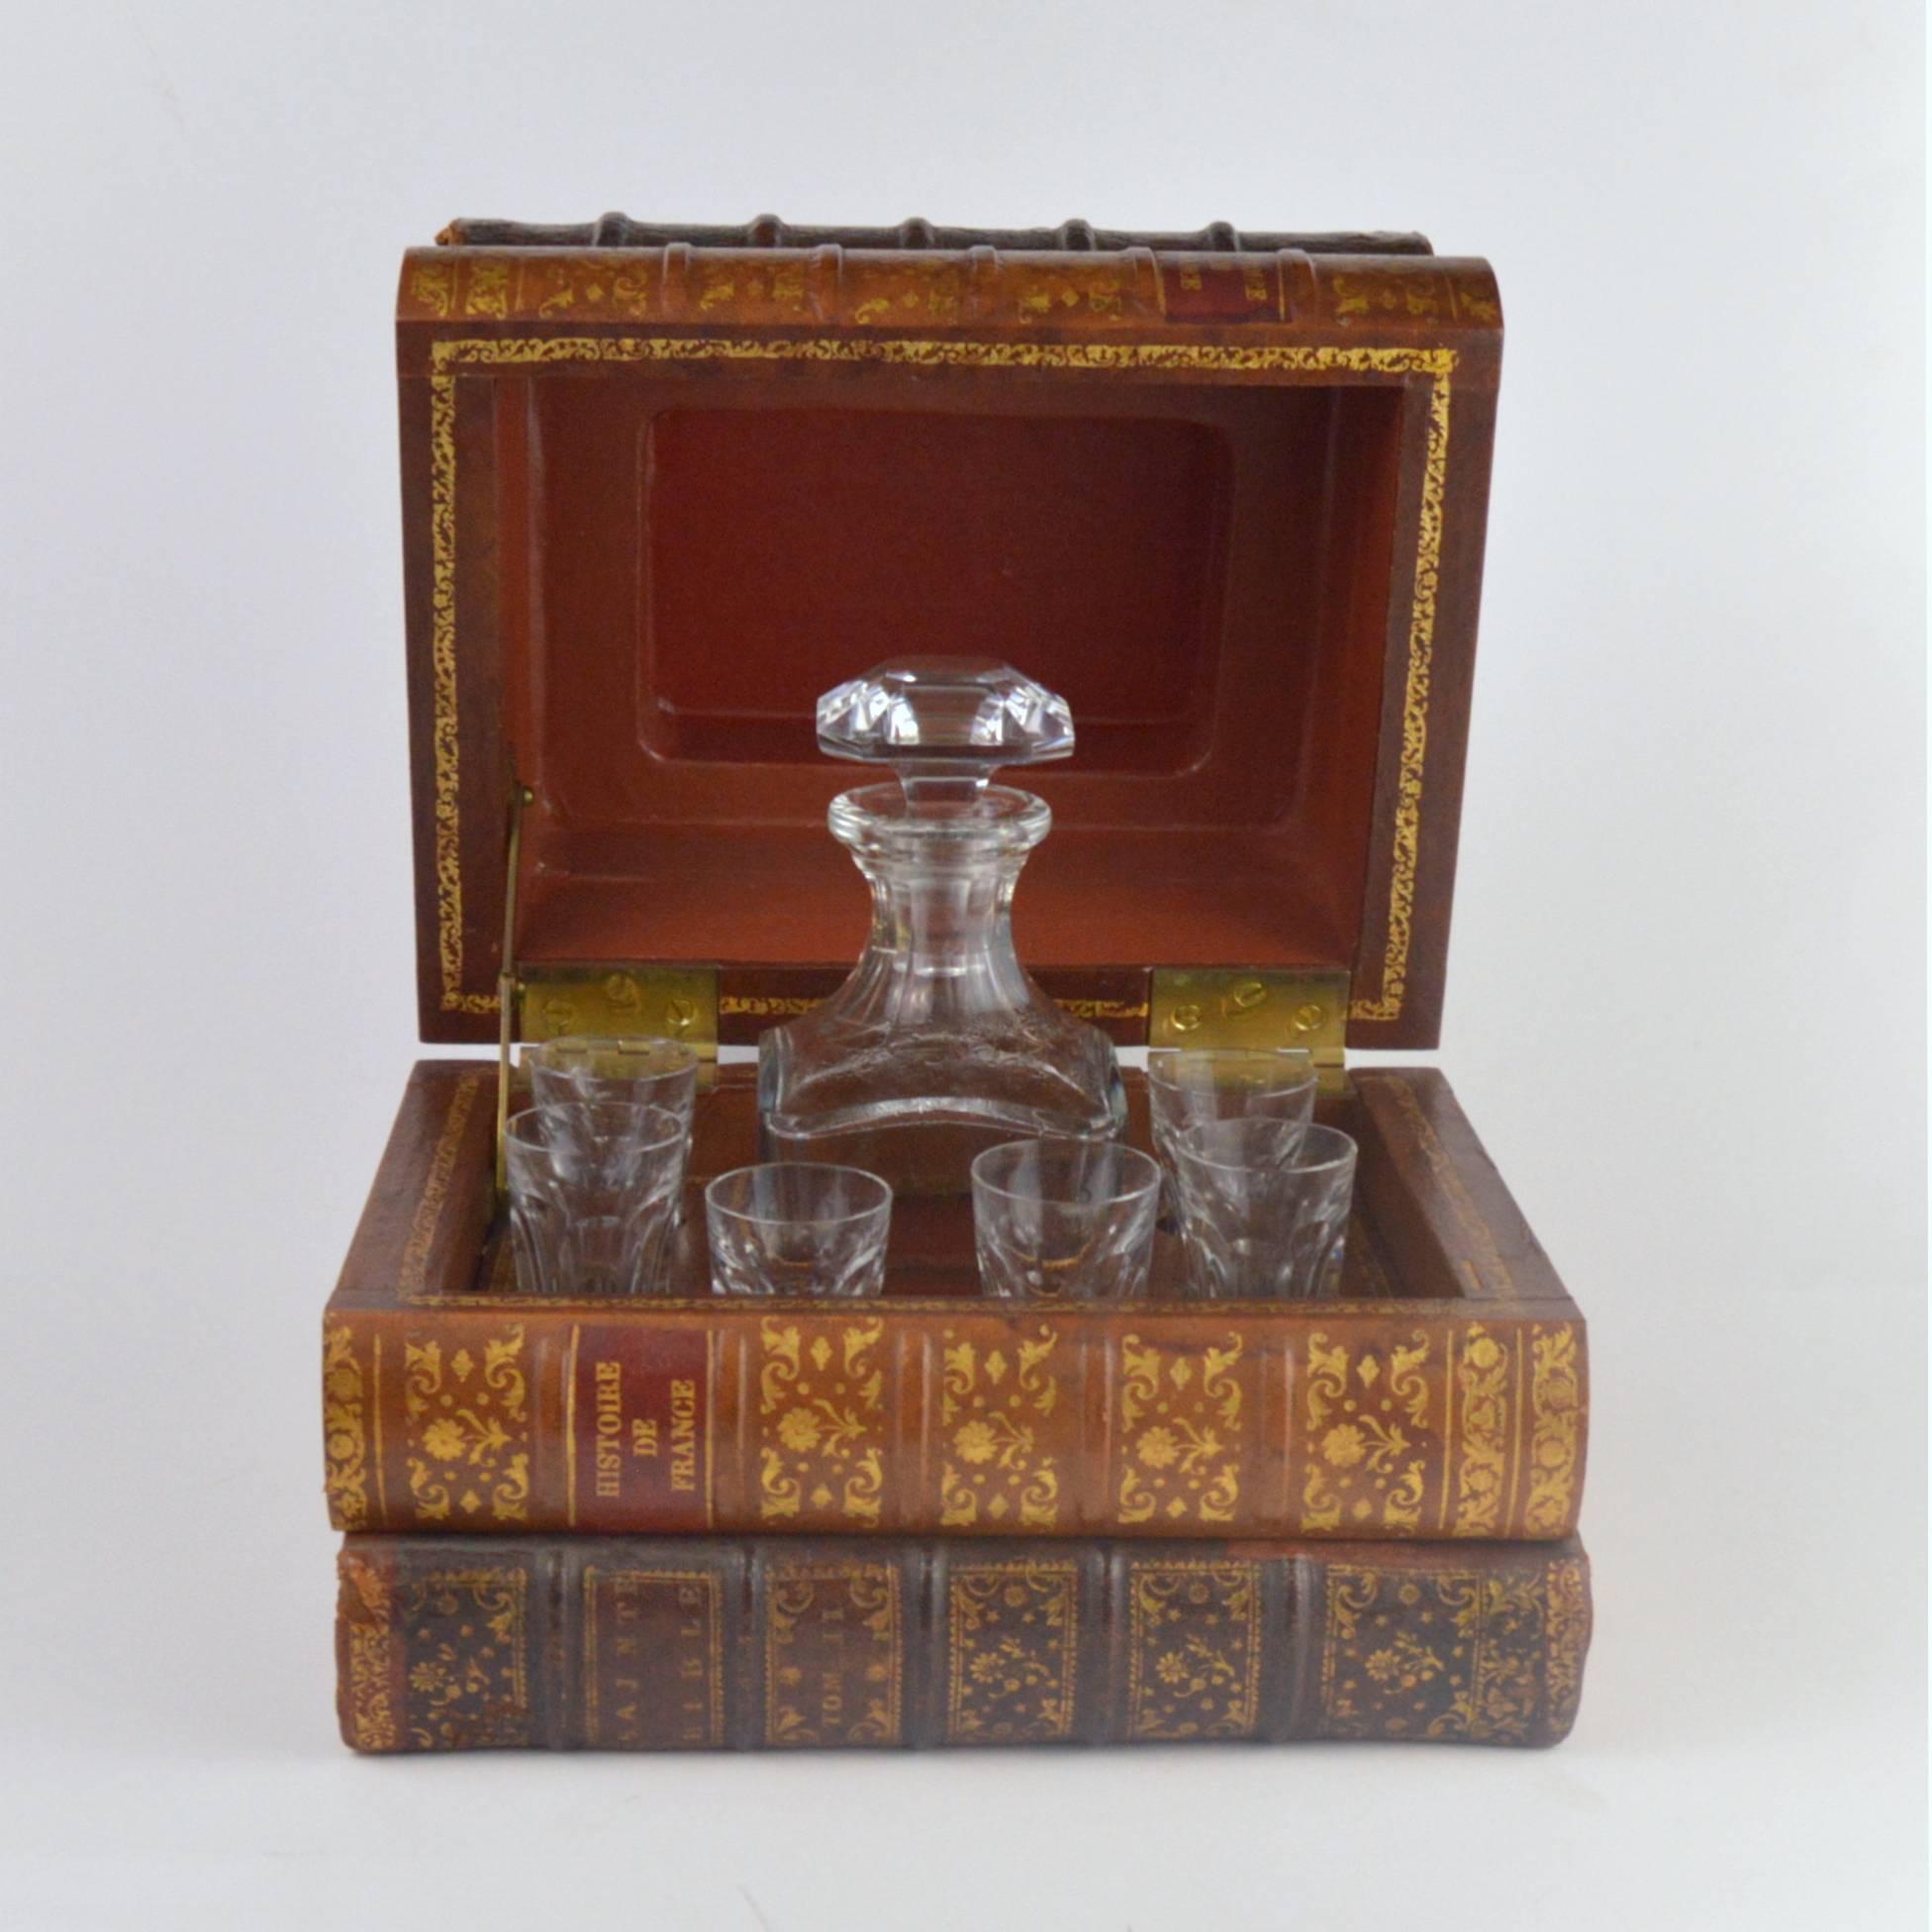 French book shaped liquor leather box with Baccarat glass.
Box dimensions: 19 x 26 x 22 cm.